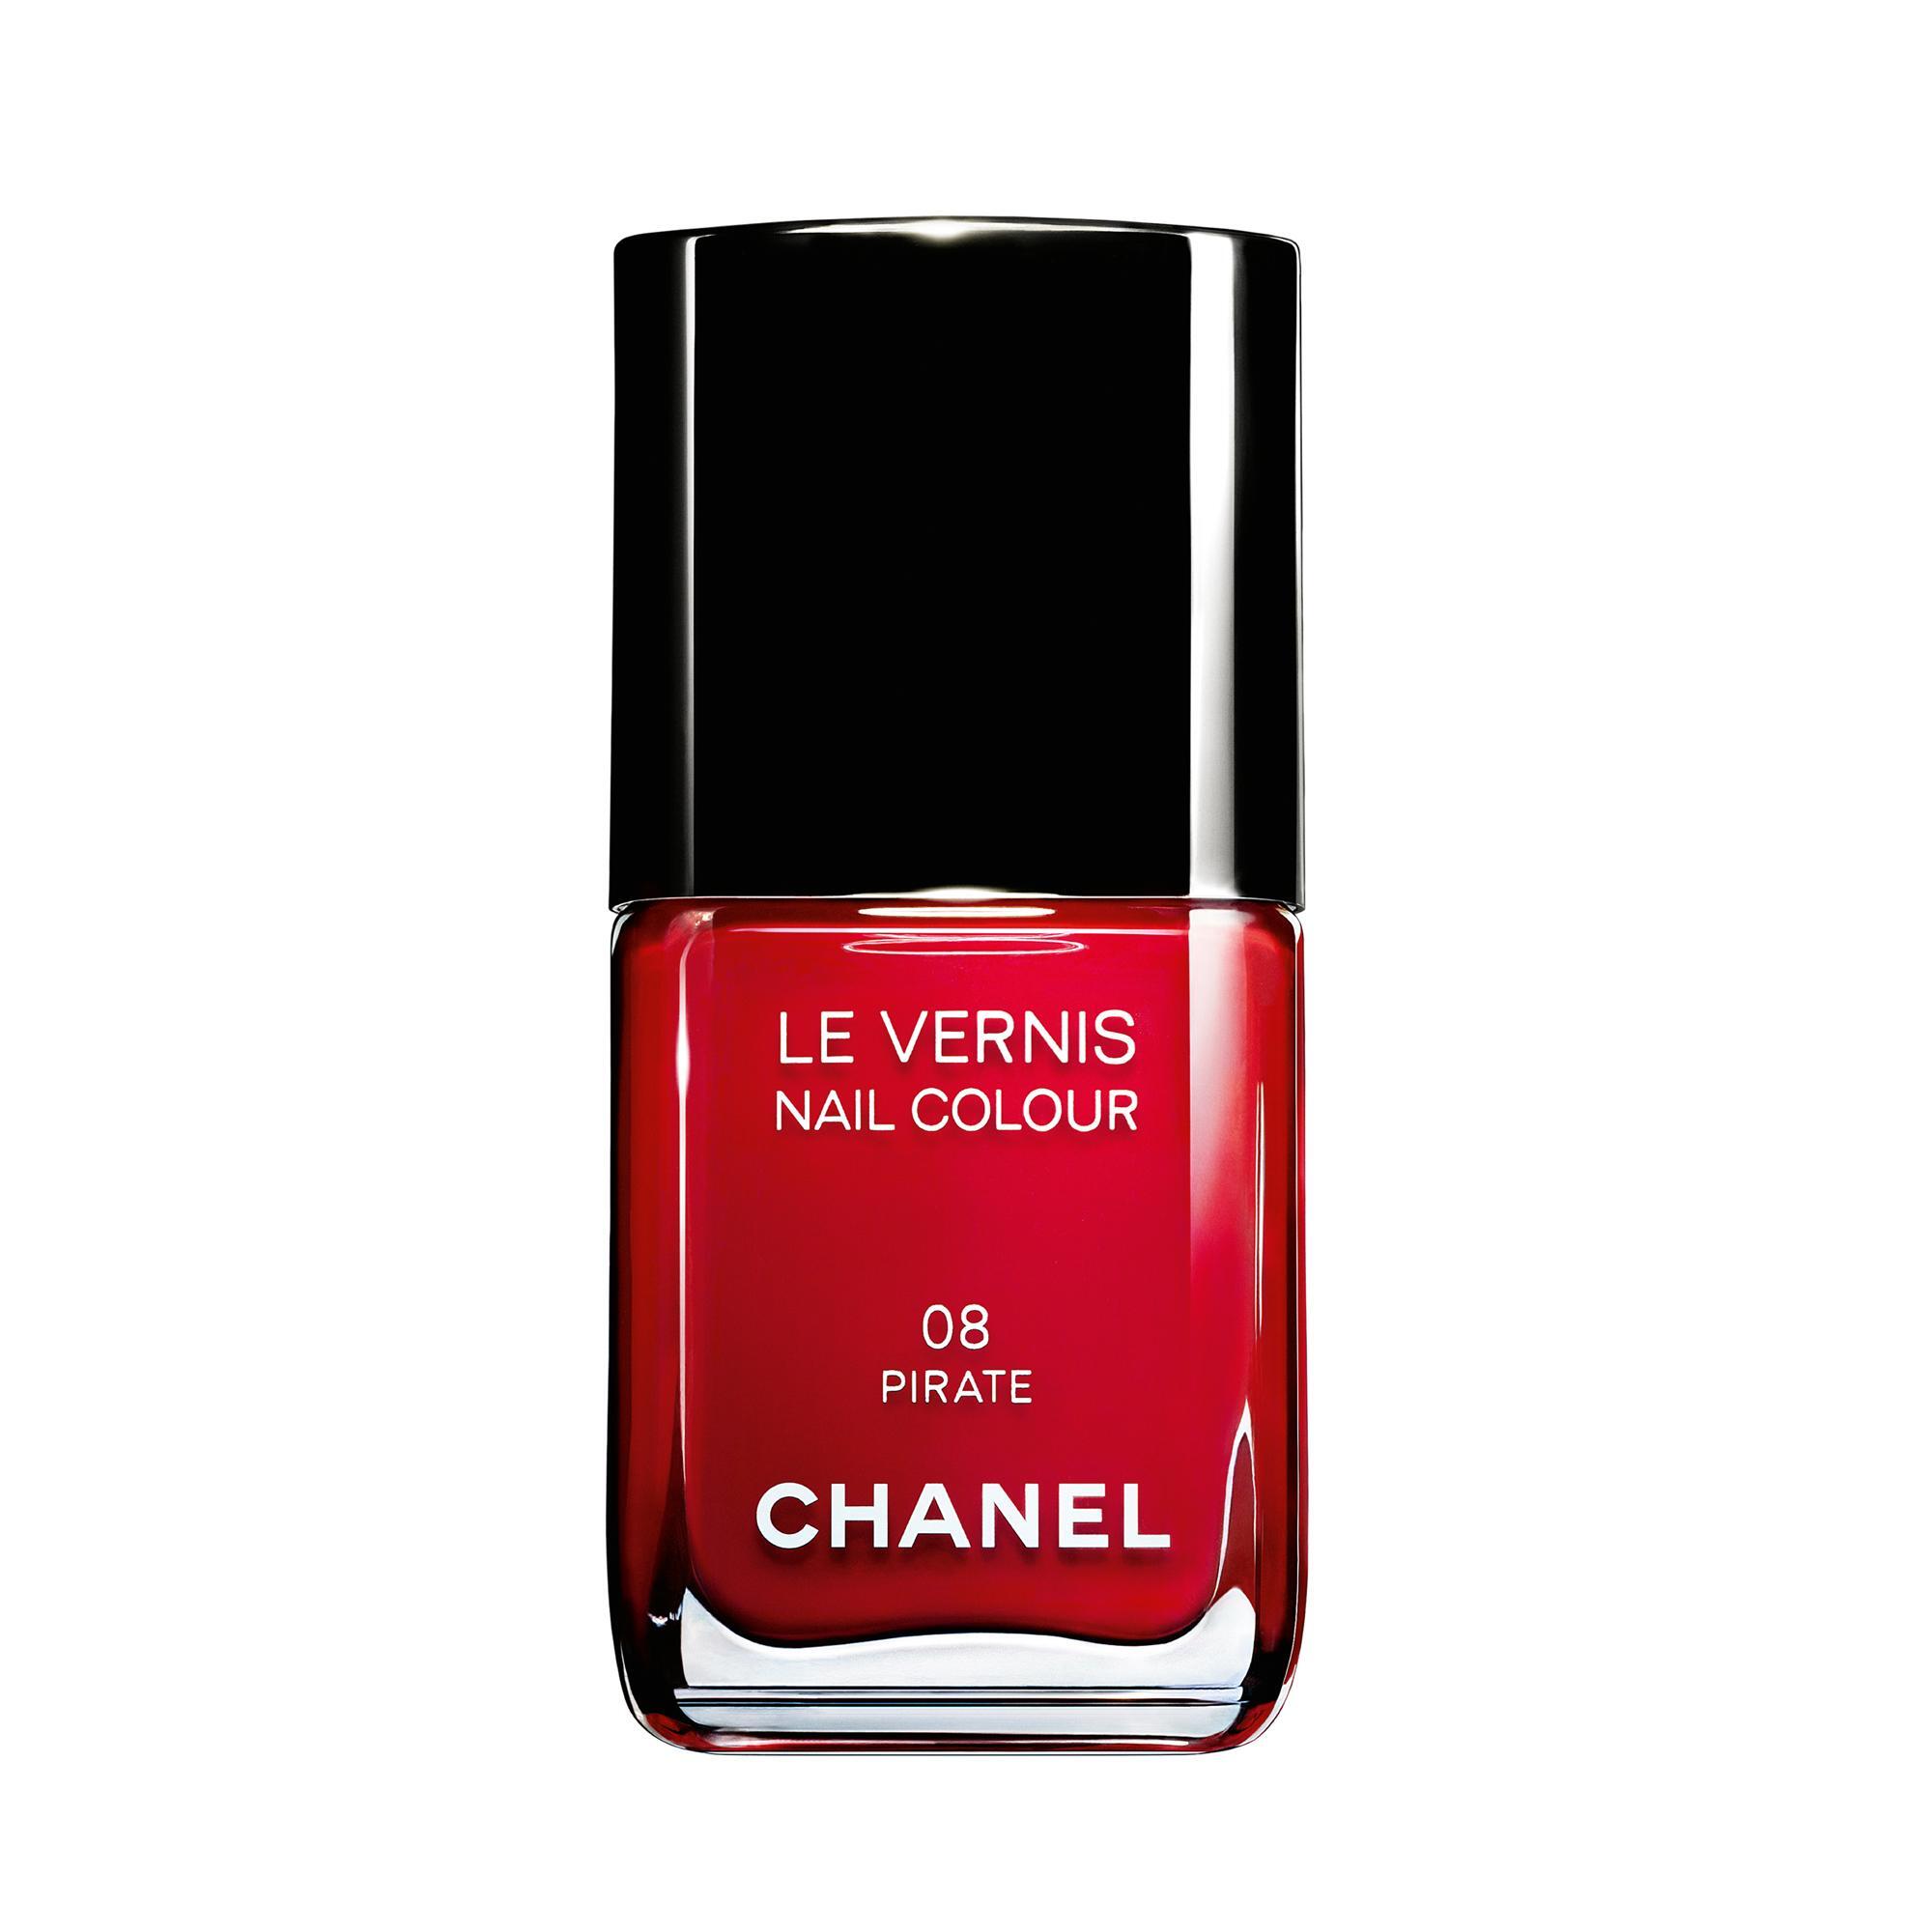 CHANEL on X: Pirate 08: the Couleur Culte of freedom in fiery red, Coco  Chanel's legendary make-up color #VernisCulte  / X